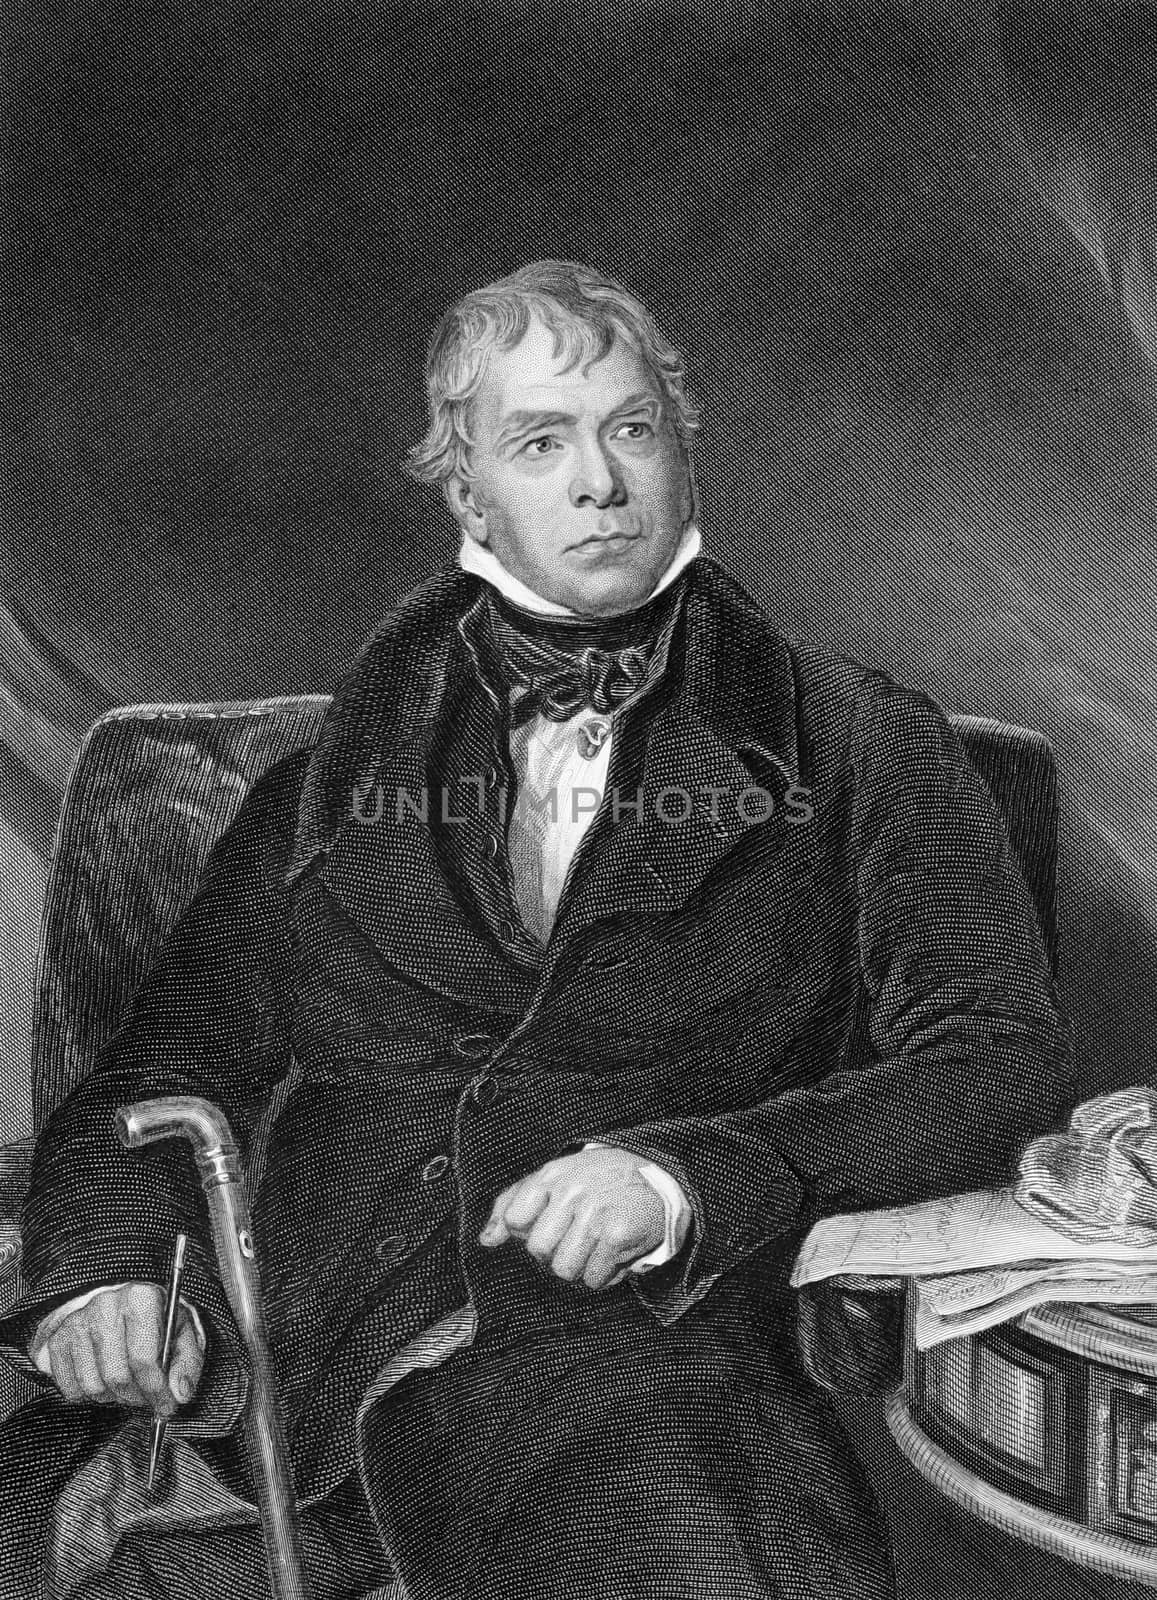 Walter Scott (1771-1832) on engraving from 1873. Scottish historical novelist, playwright and poet. Engraved by unknown artist and published in ''Portrait Gallery of Eminent Men and Women with Biographies'',USA,1873.